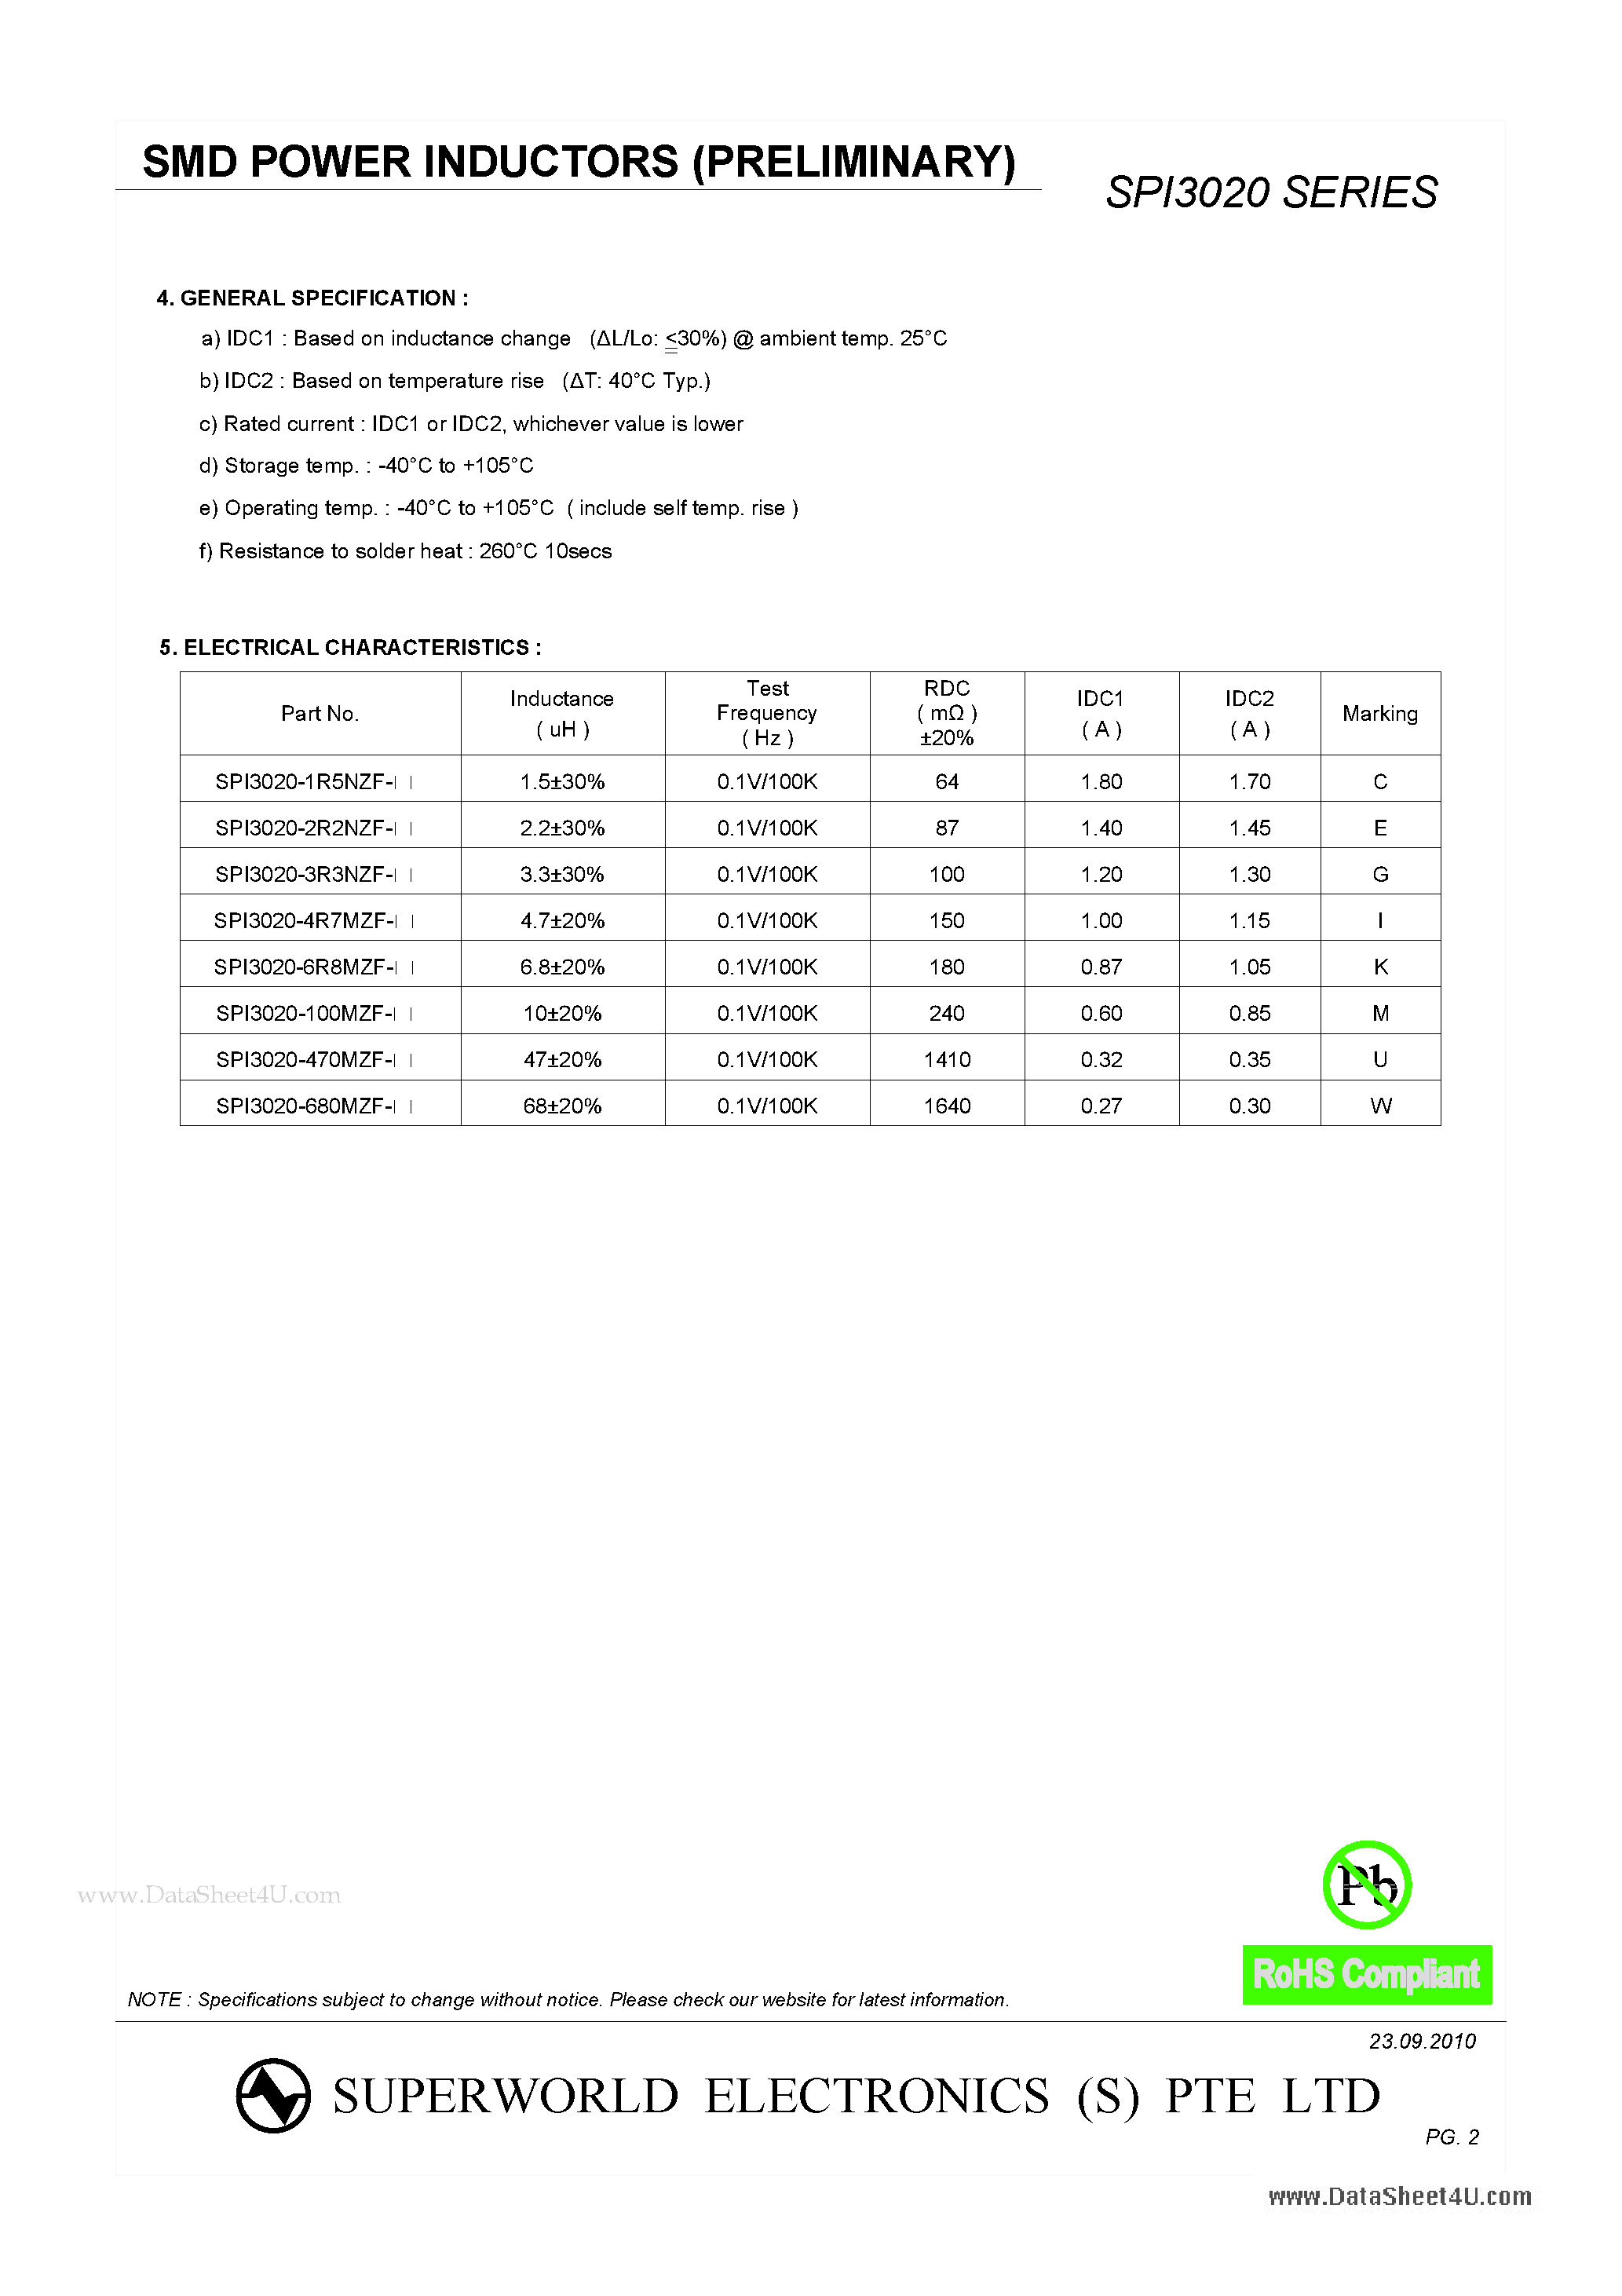 Datasheet SPI3020 - SMD POWER INDUCTORS page 2